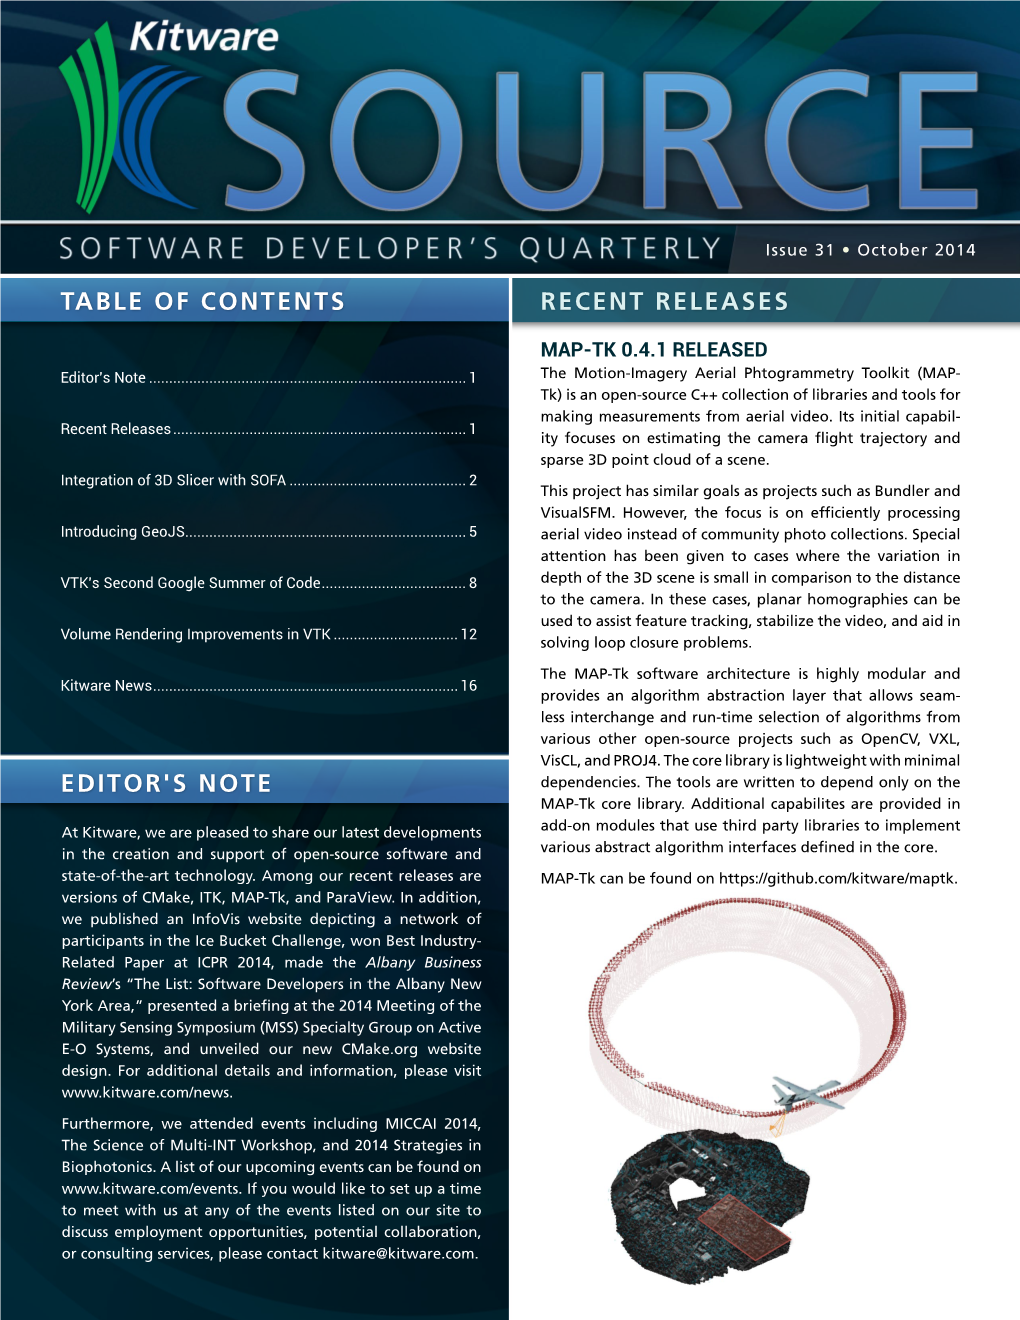 Kitware Source Issue 31